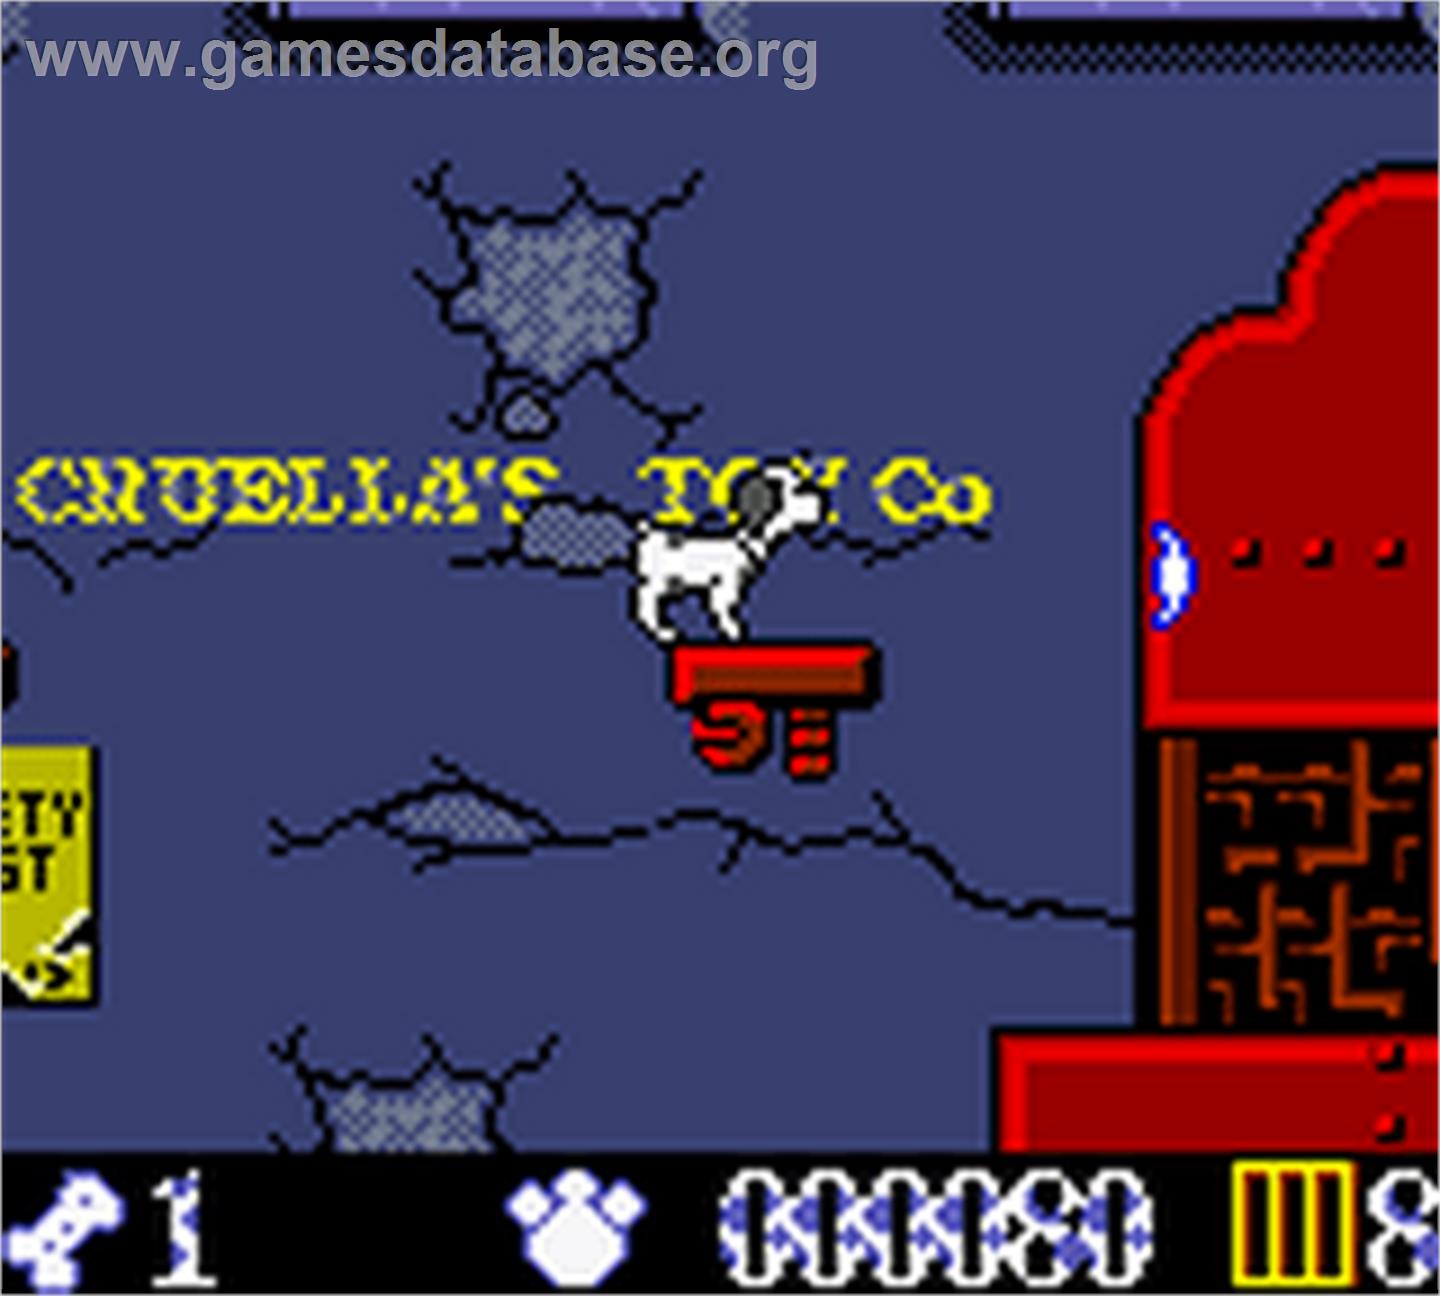 102 Dalmatians: Puppies to the Rescue - Nintendo Game Boy Color - Artwork - In Game